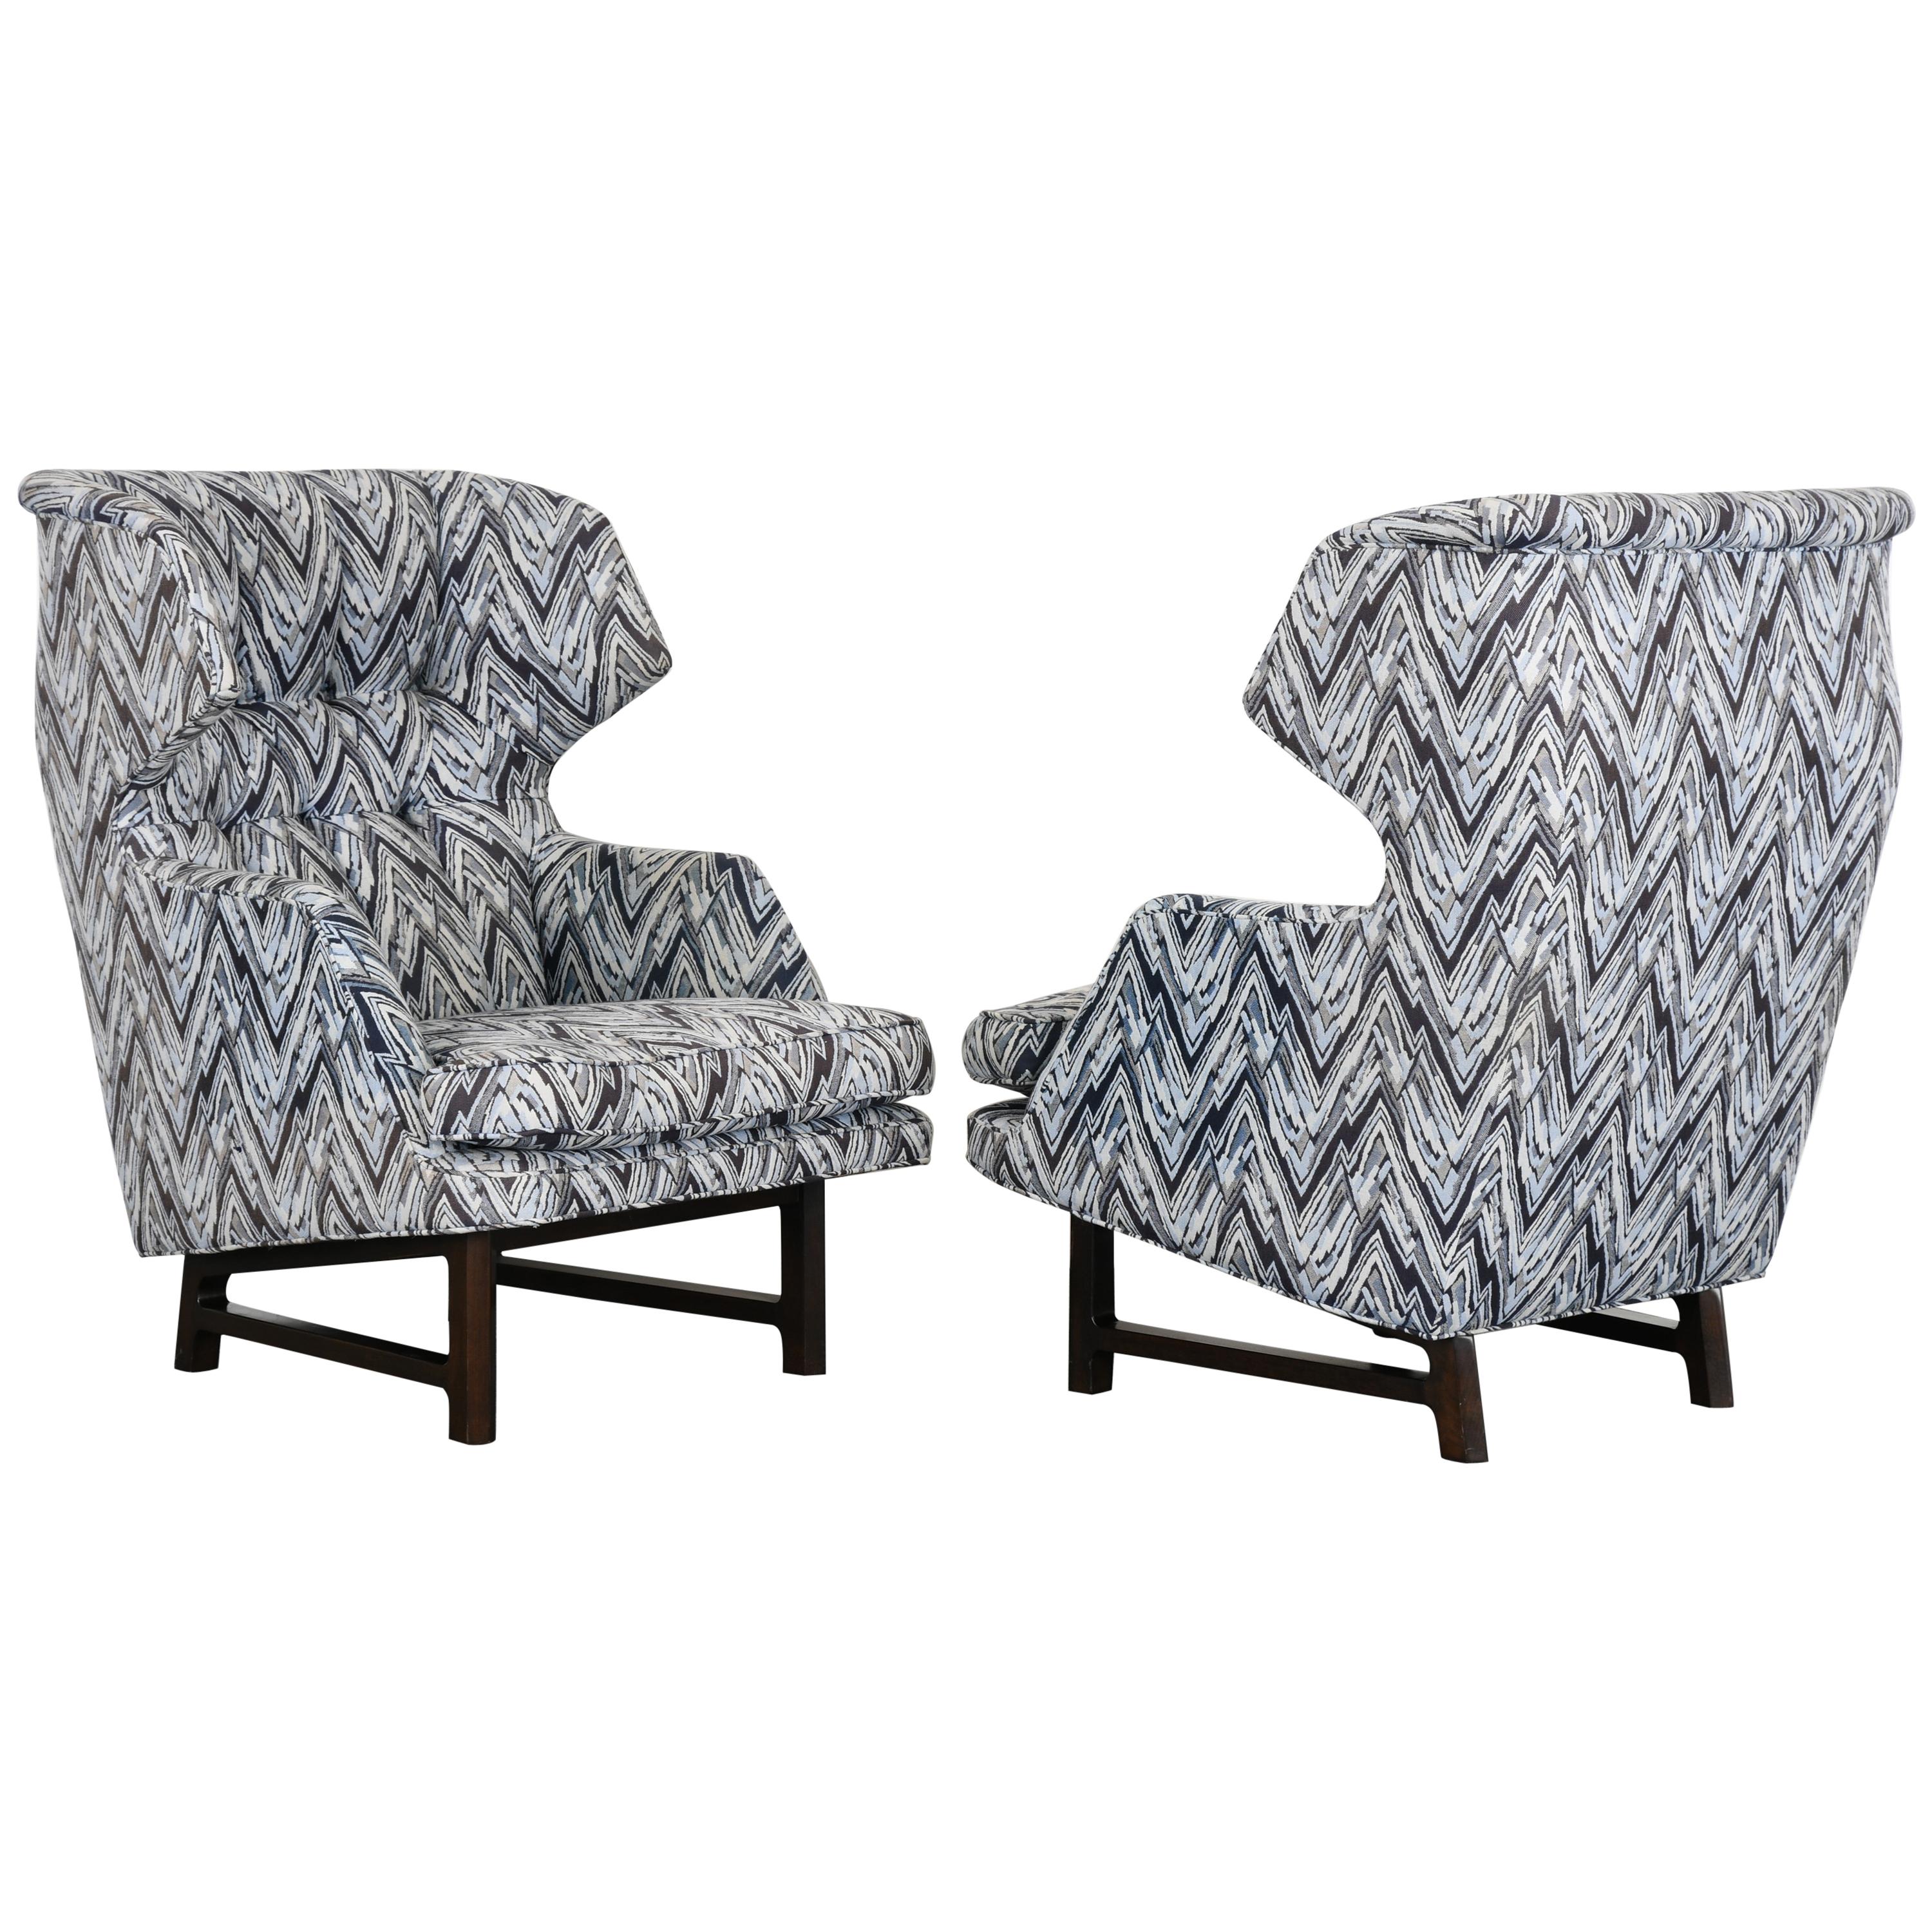 Pair of Wingback "Janus" Lounge Chairs by Edward Wormley for Dunbar, 1960s